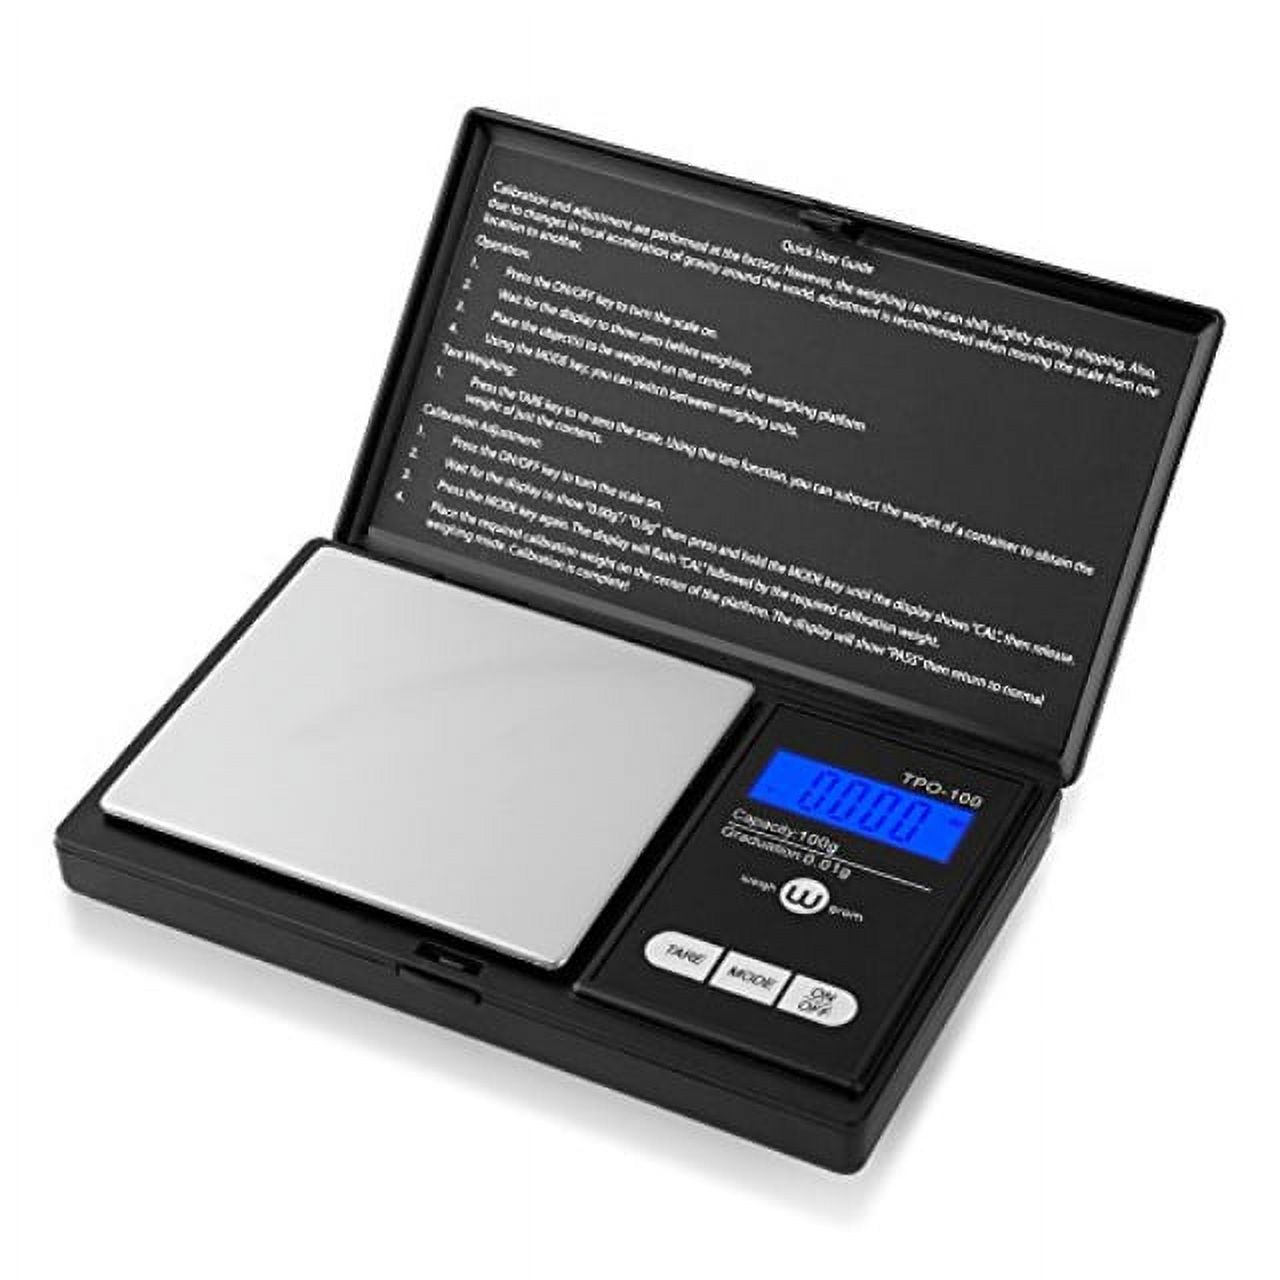 Weigh Gram Scale Digital Pocket Scale, 100g by 0.01g, Digital Grams Scale, Food Scale, Jewelry Scale Black, Kitchen Scale (TOP-100) - image 1 of 5